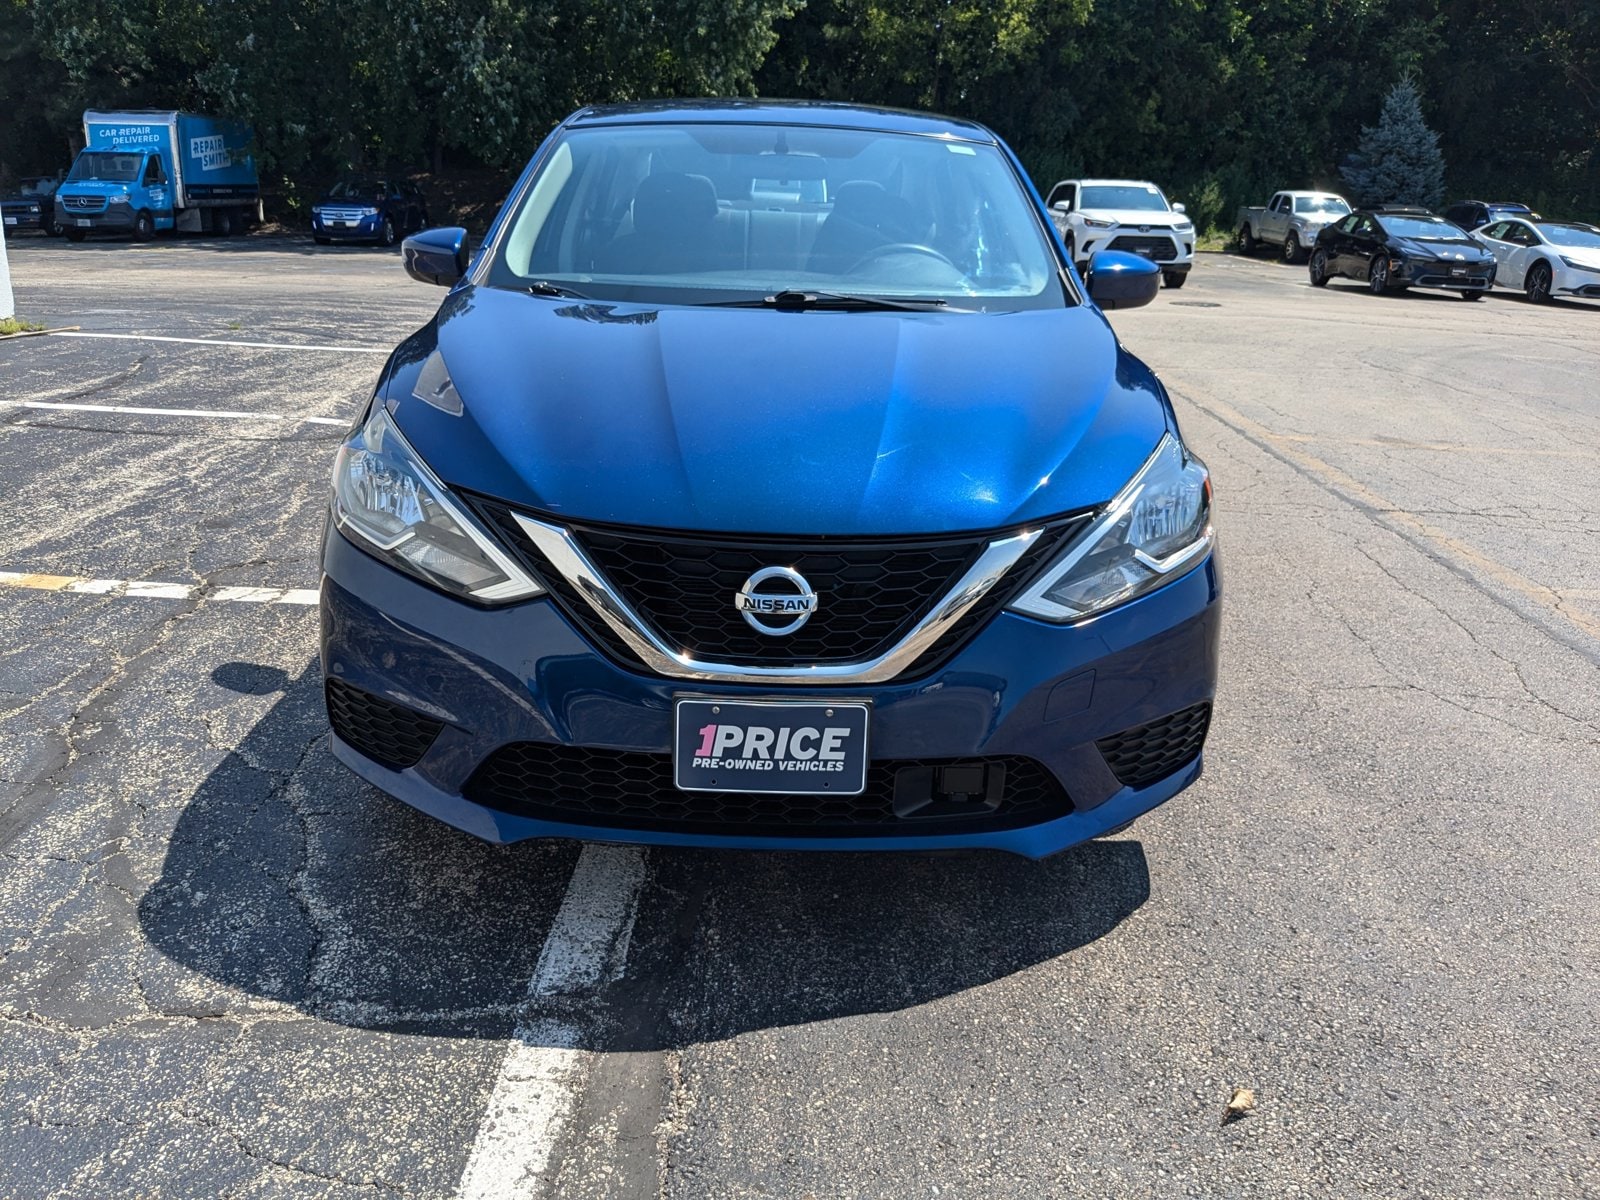 Used 2019 Nissan Sentra S with VIN 3N1AB7AP9KY236693 for sale in Libertyville, IL